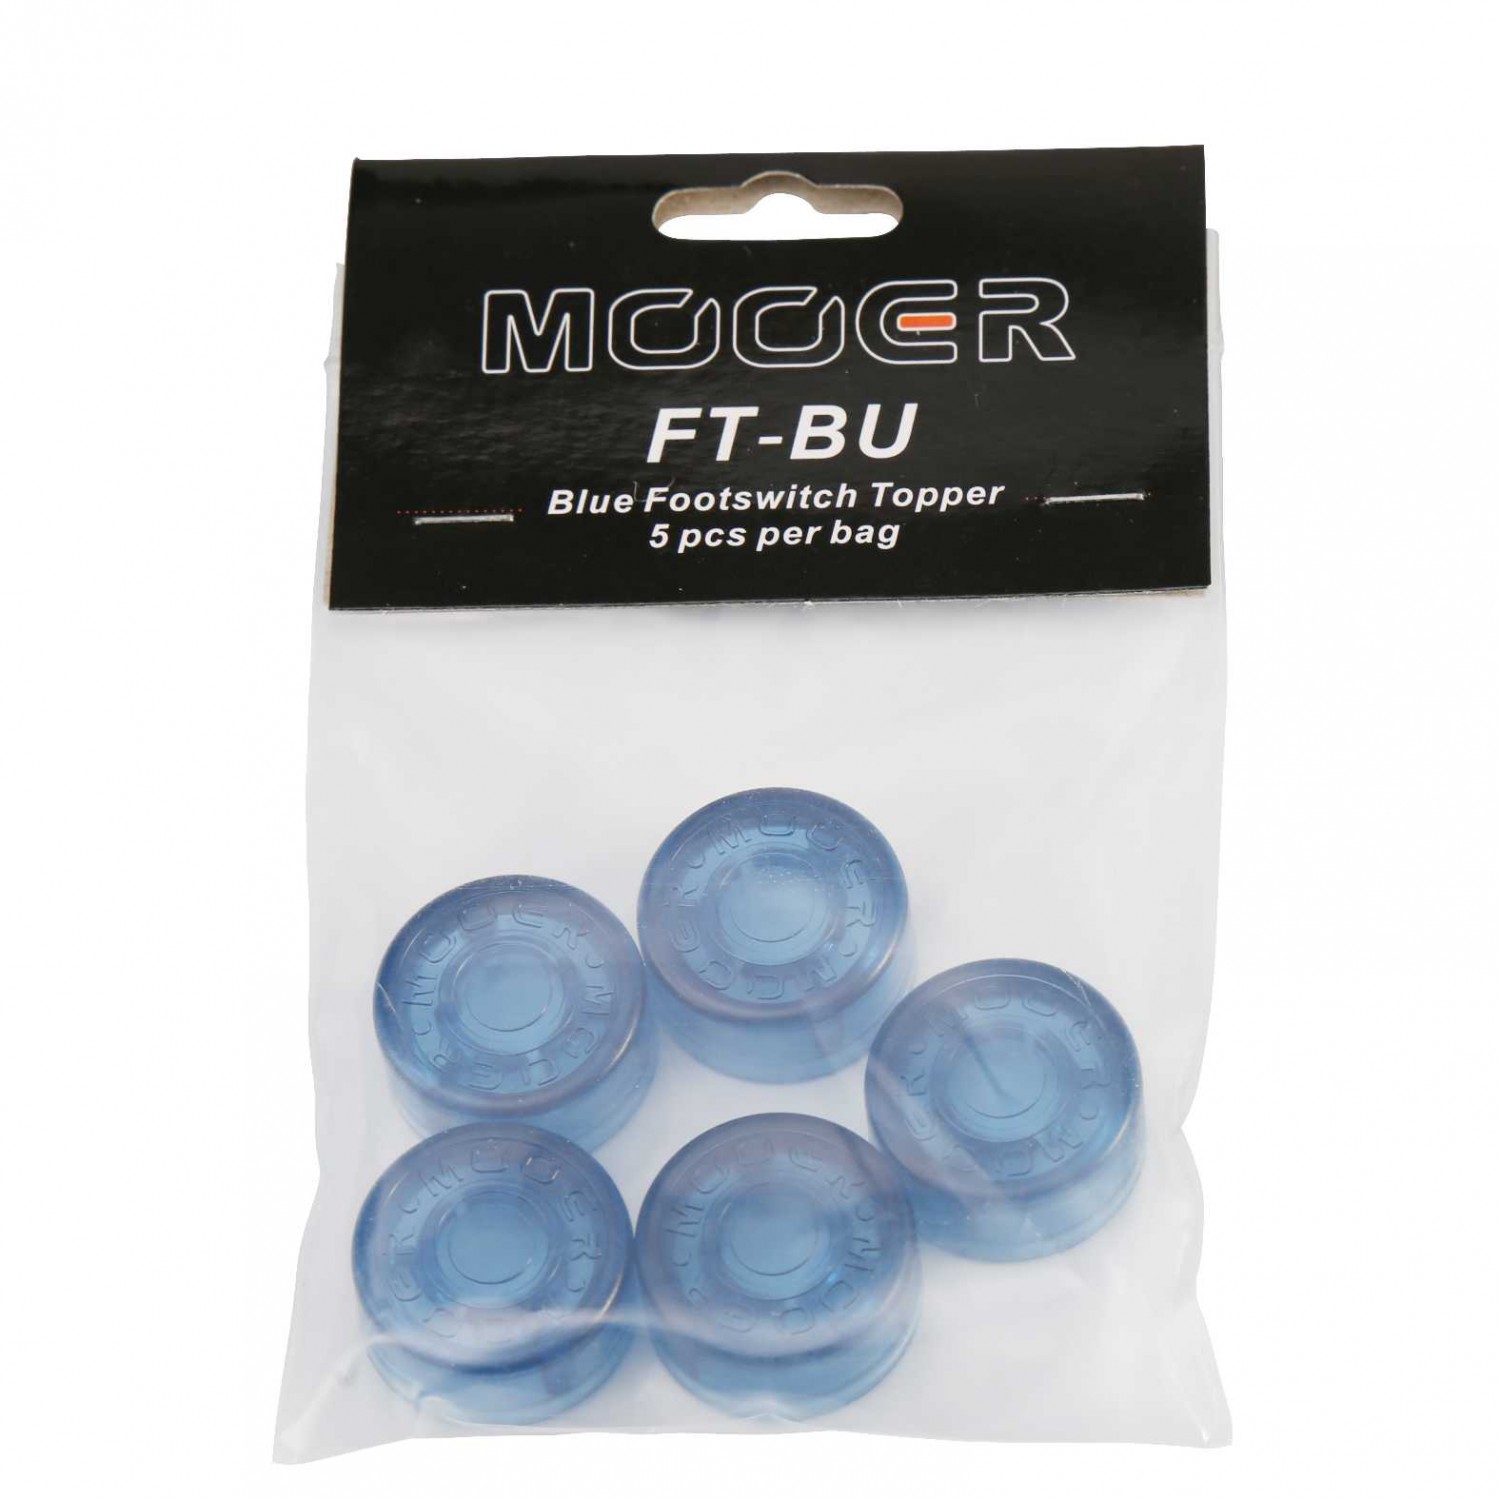 Mooer Candy Footswitch Topper, blue, 5 pcs.